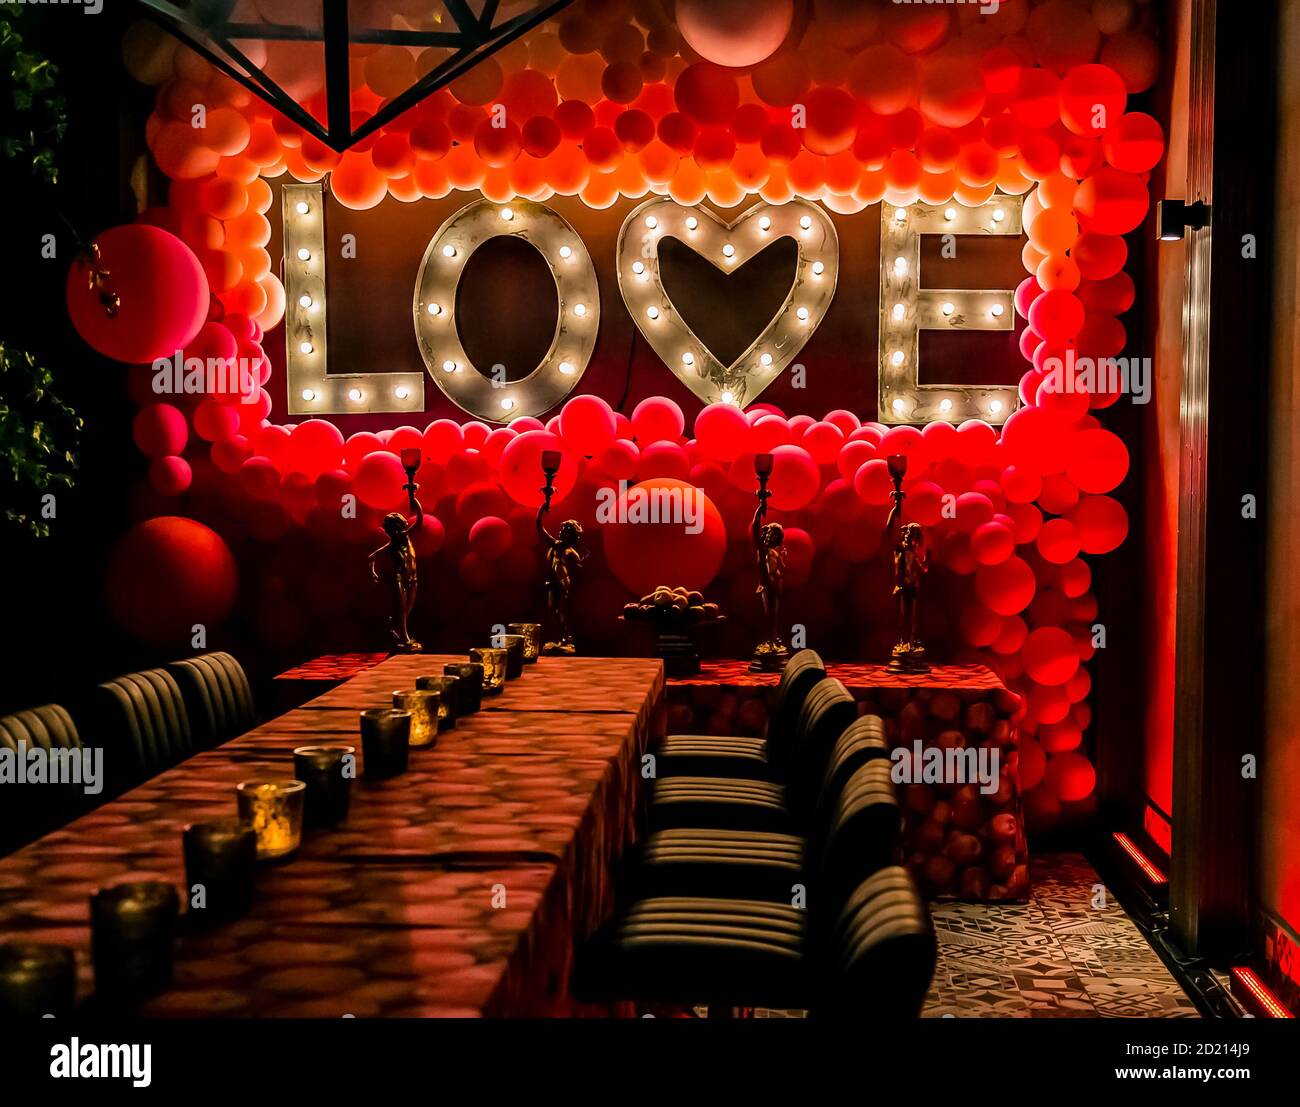 Romantic themed interior decor at restaurant for valentine's day with red  balloons and the word love in lights Stock Photo - Alamy